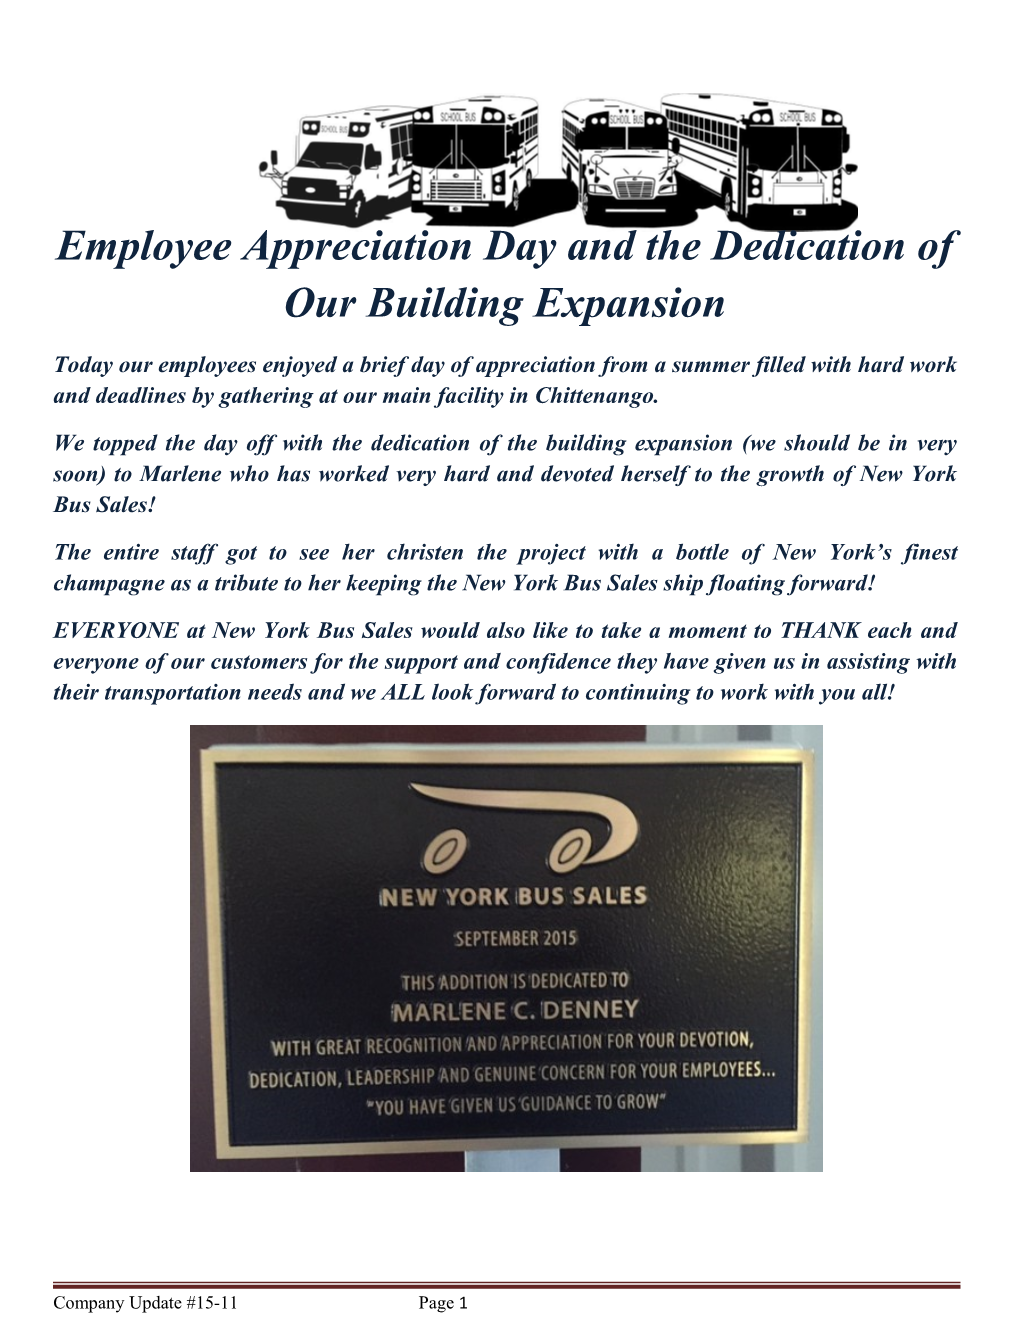 Employee Appreciation Day and the Dedication of Our Building Expansion